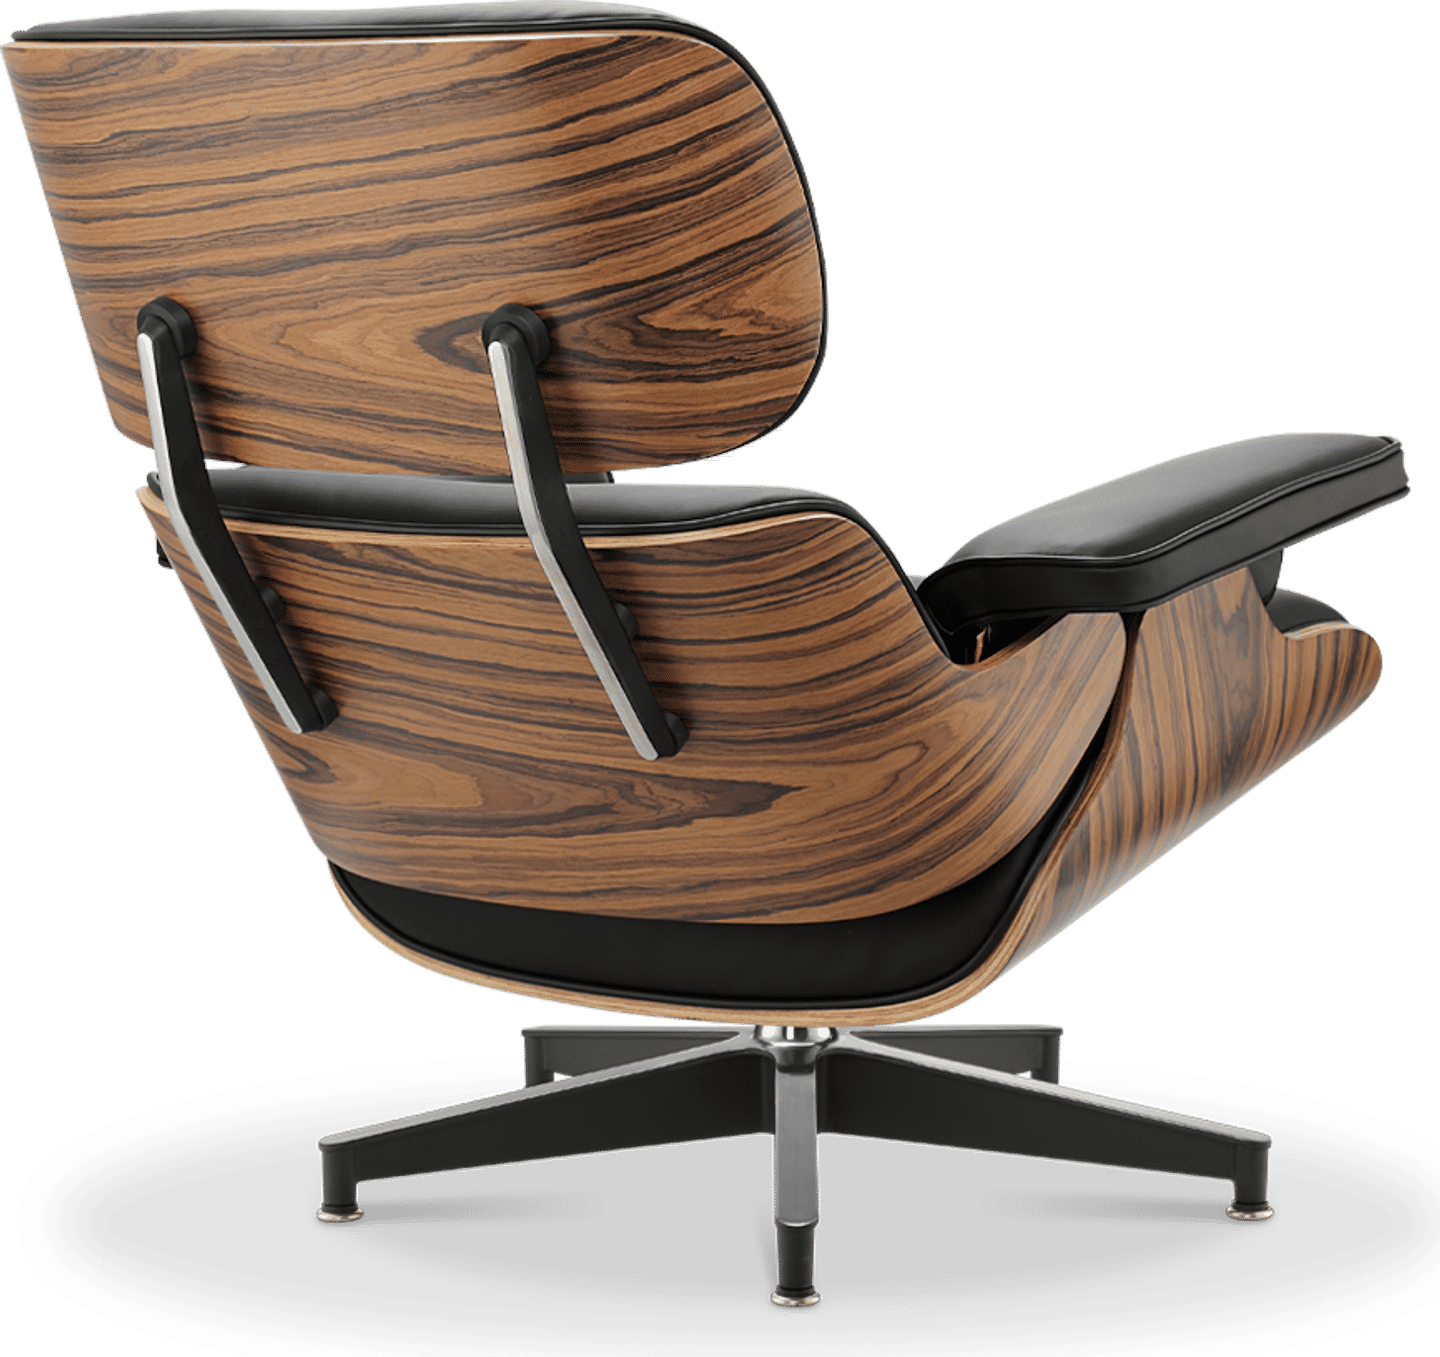 Eames Style Lounge Chair H Miller Version Premium Leather/Black/Rosewood image.